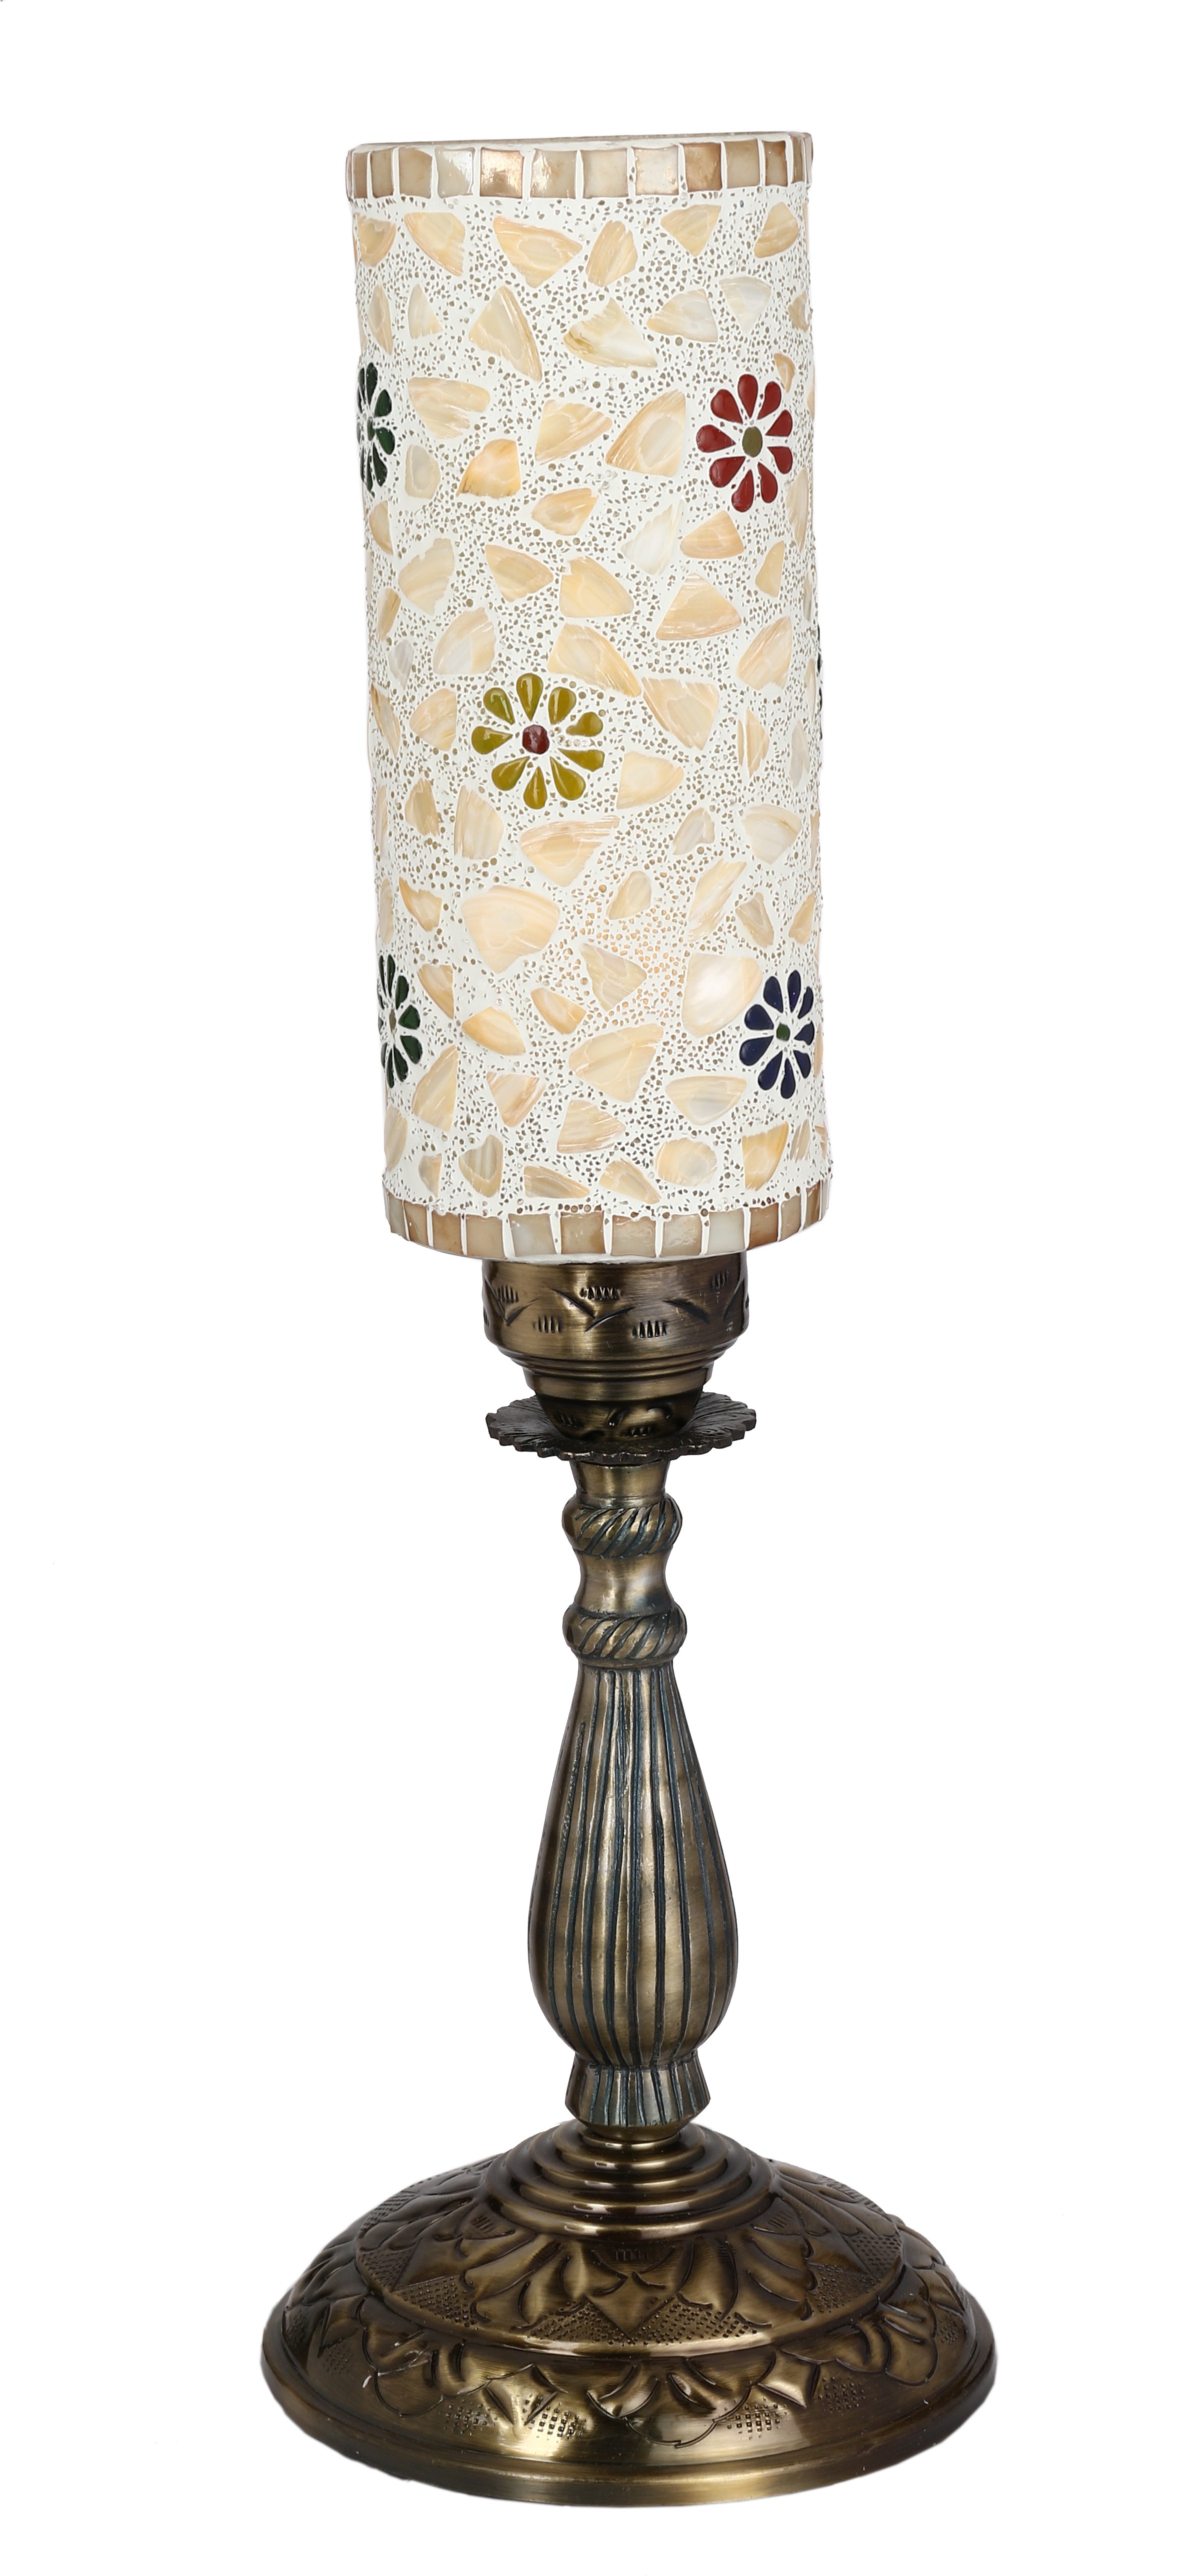 Antique Style Metal & Glass Table Lamp For Home